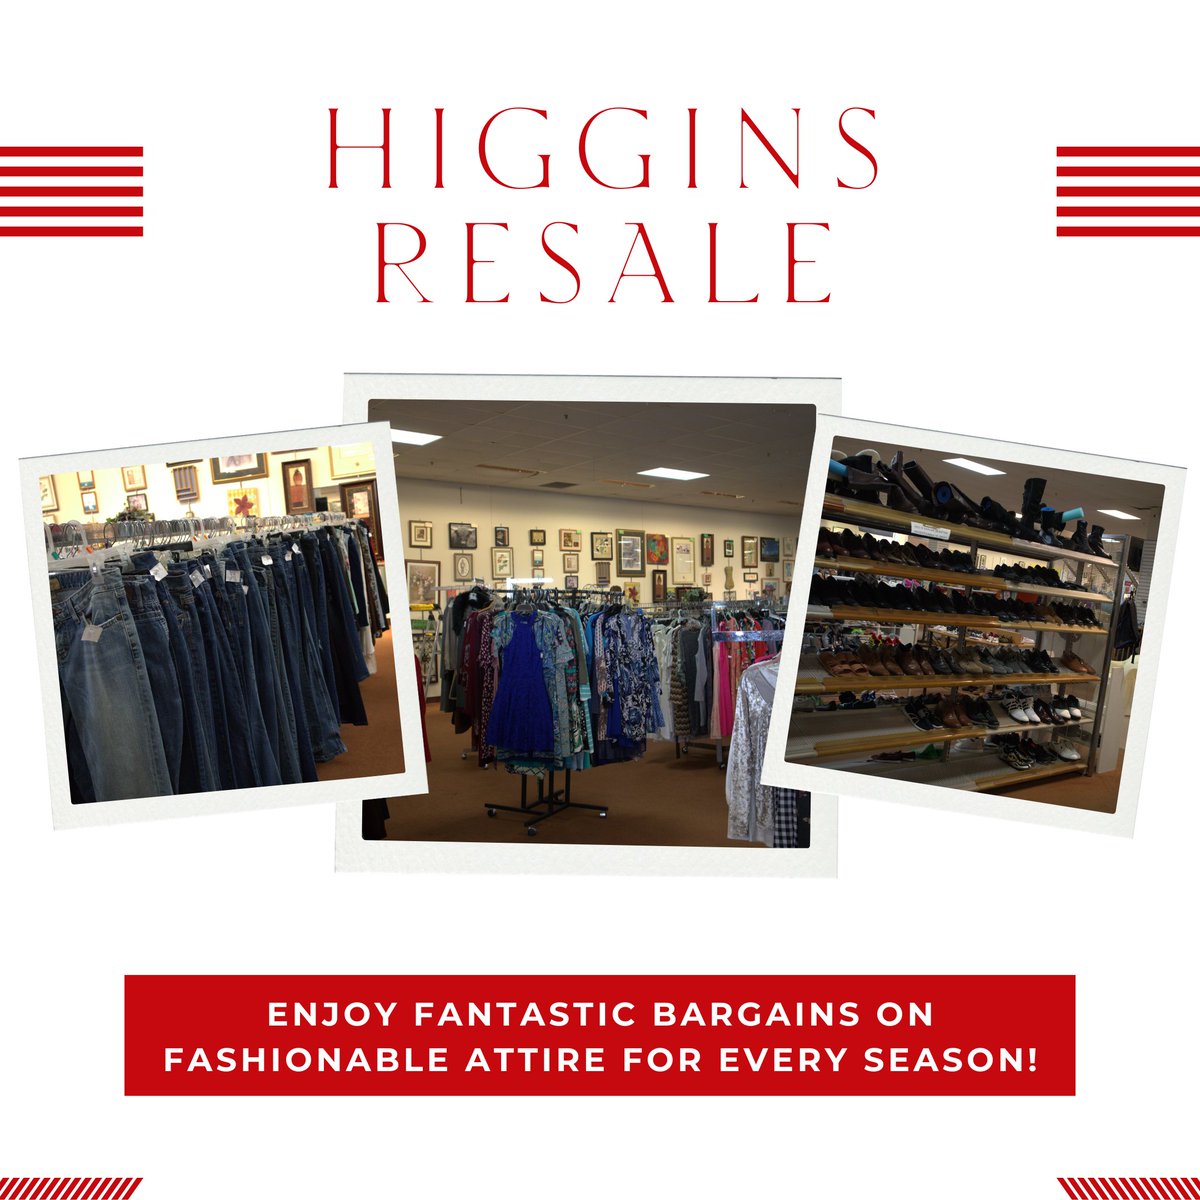 Discover unbeatable bargains and quality finds at Higgins Resale Shops! Explore our curated selection of fashionable attire, baby gear, kitchen essentials, and more. Shop with confidence knowing you're getting the best for less! 💻faithmission.us/higgins-branch/.